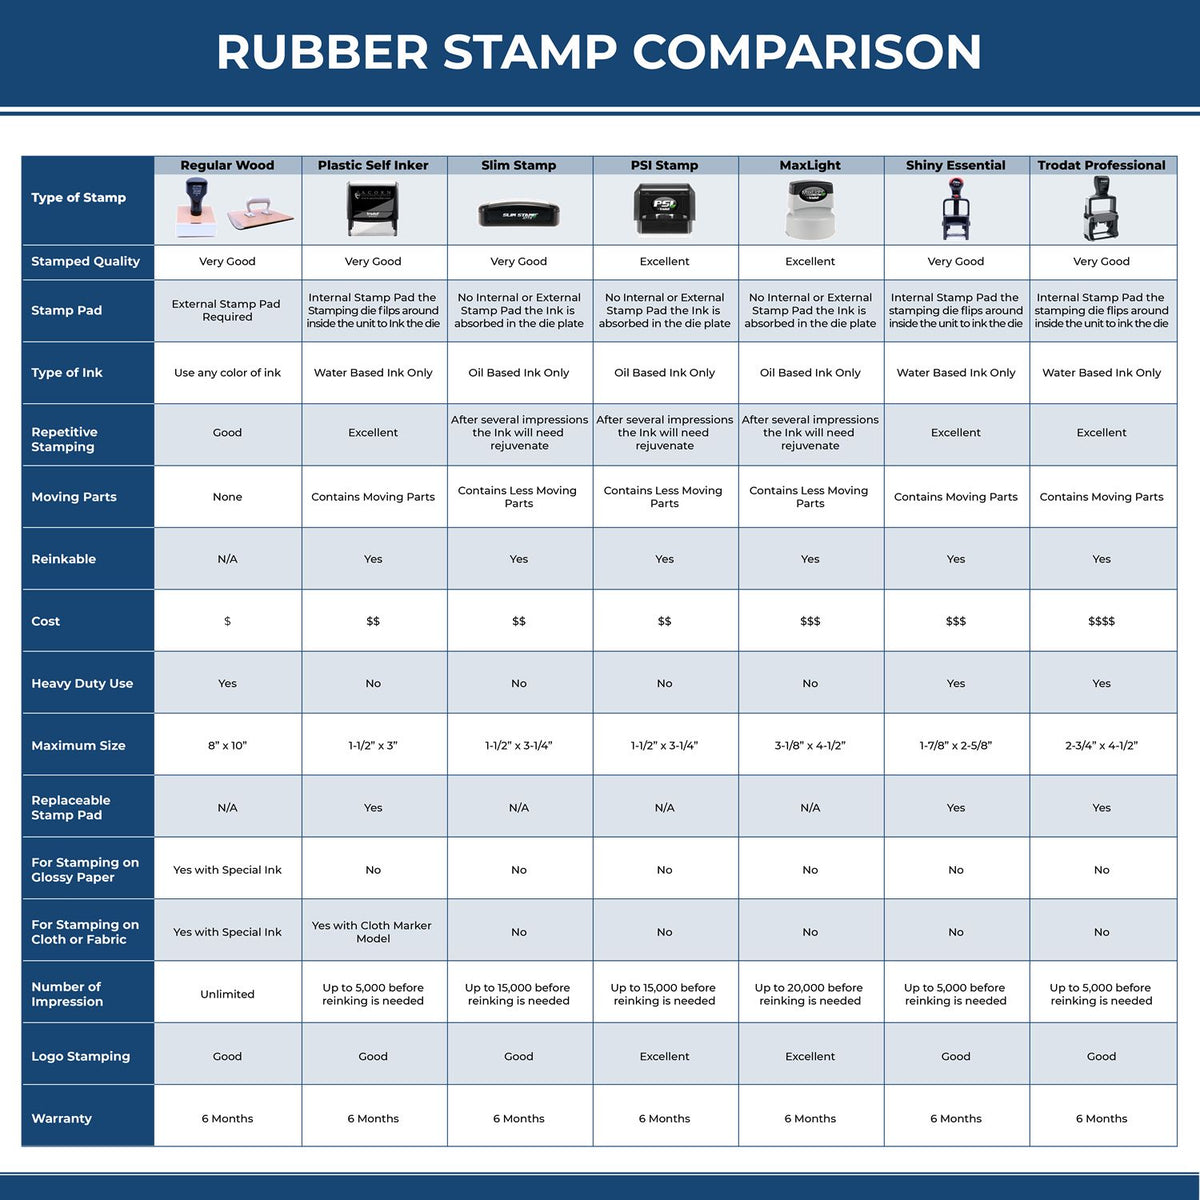 A comparison chart for the different types of mount models available for the Super Slim Puerto Rico Notary Public Stamp.